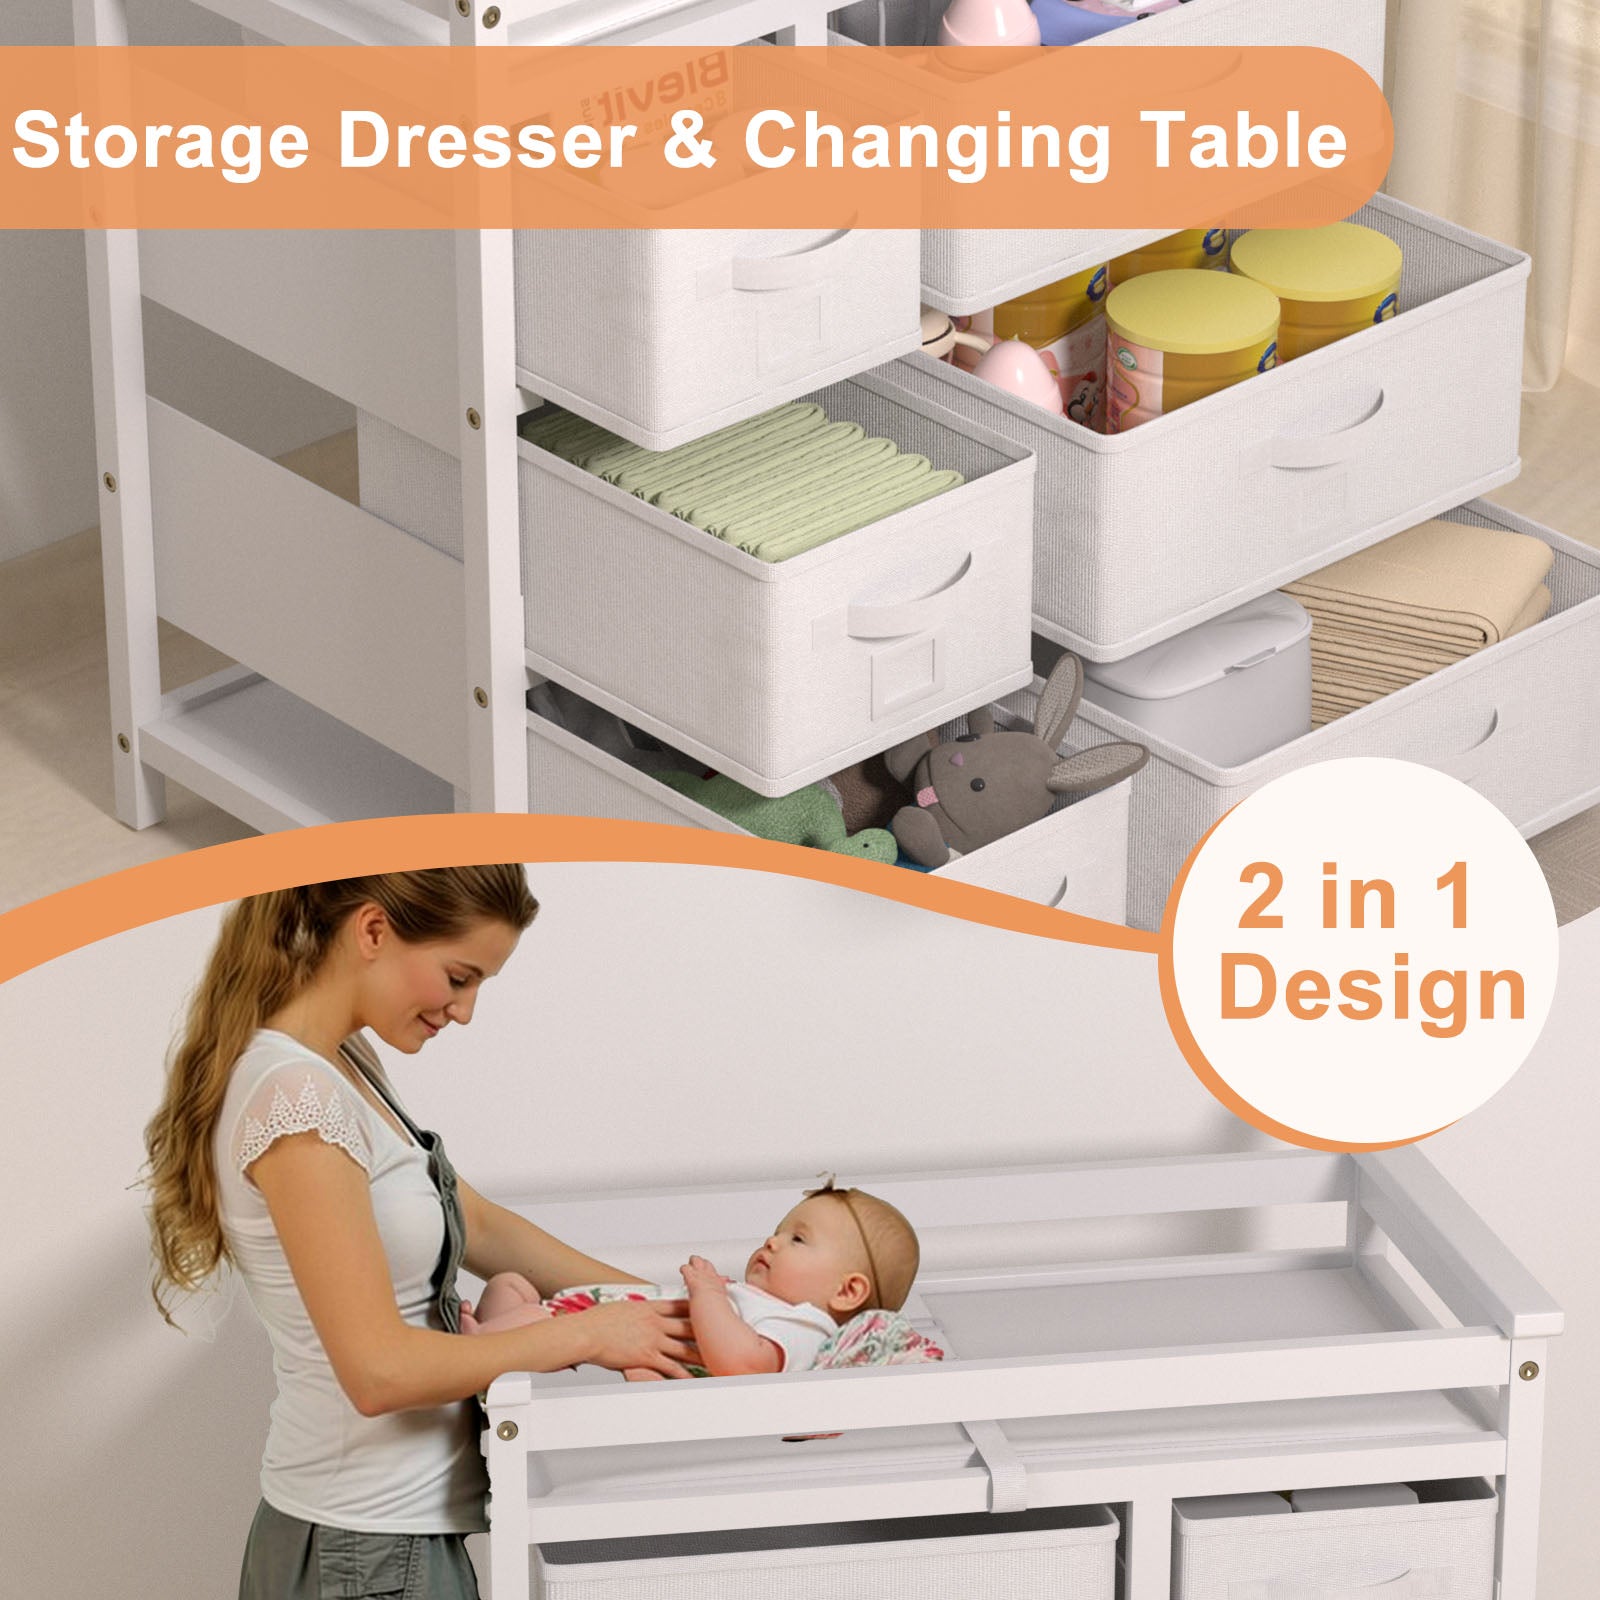 XJD Baby Changing Table with 6 Storage Baskets, Changing Table Dresser with Changing Table Top, Baby Diaper Changing Station (White)